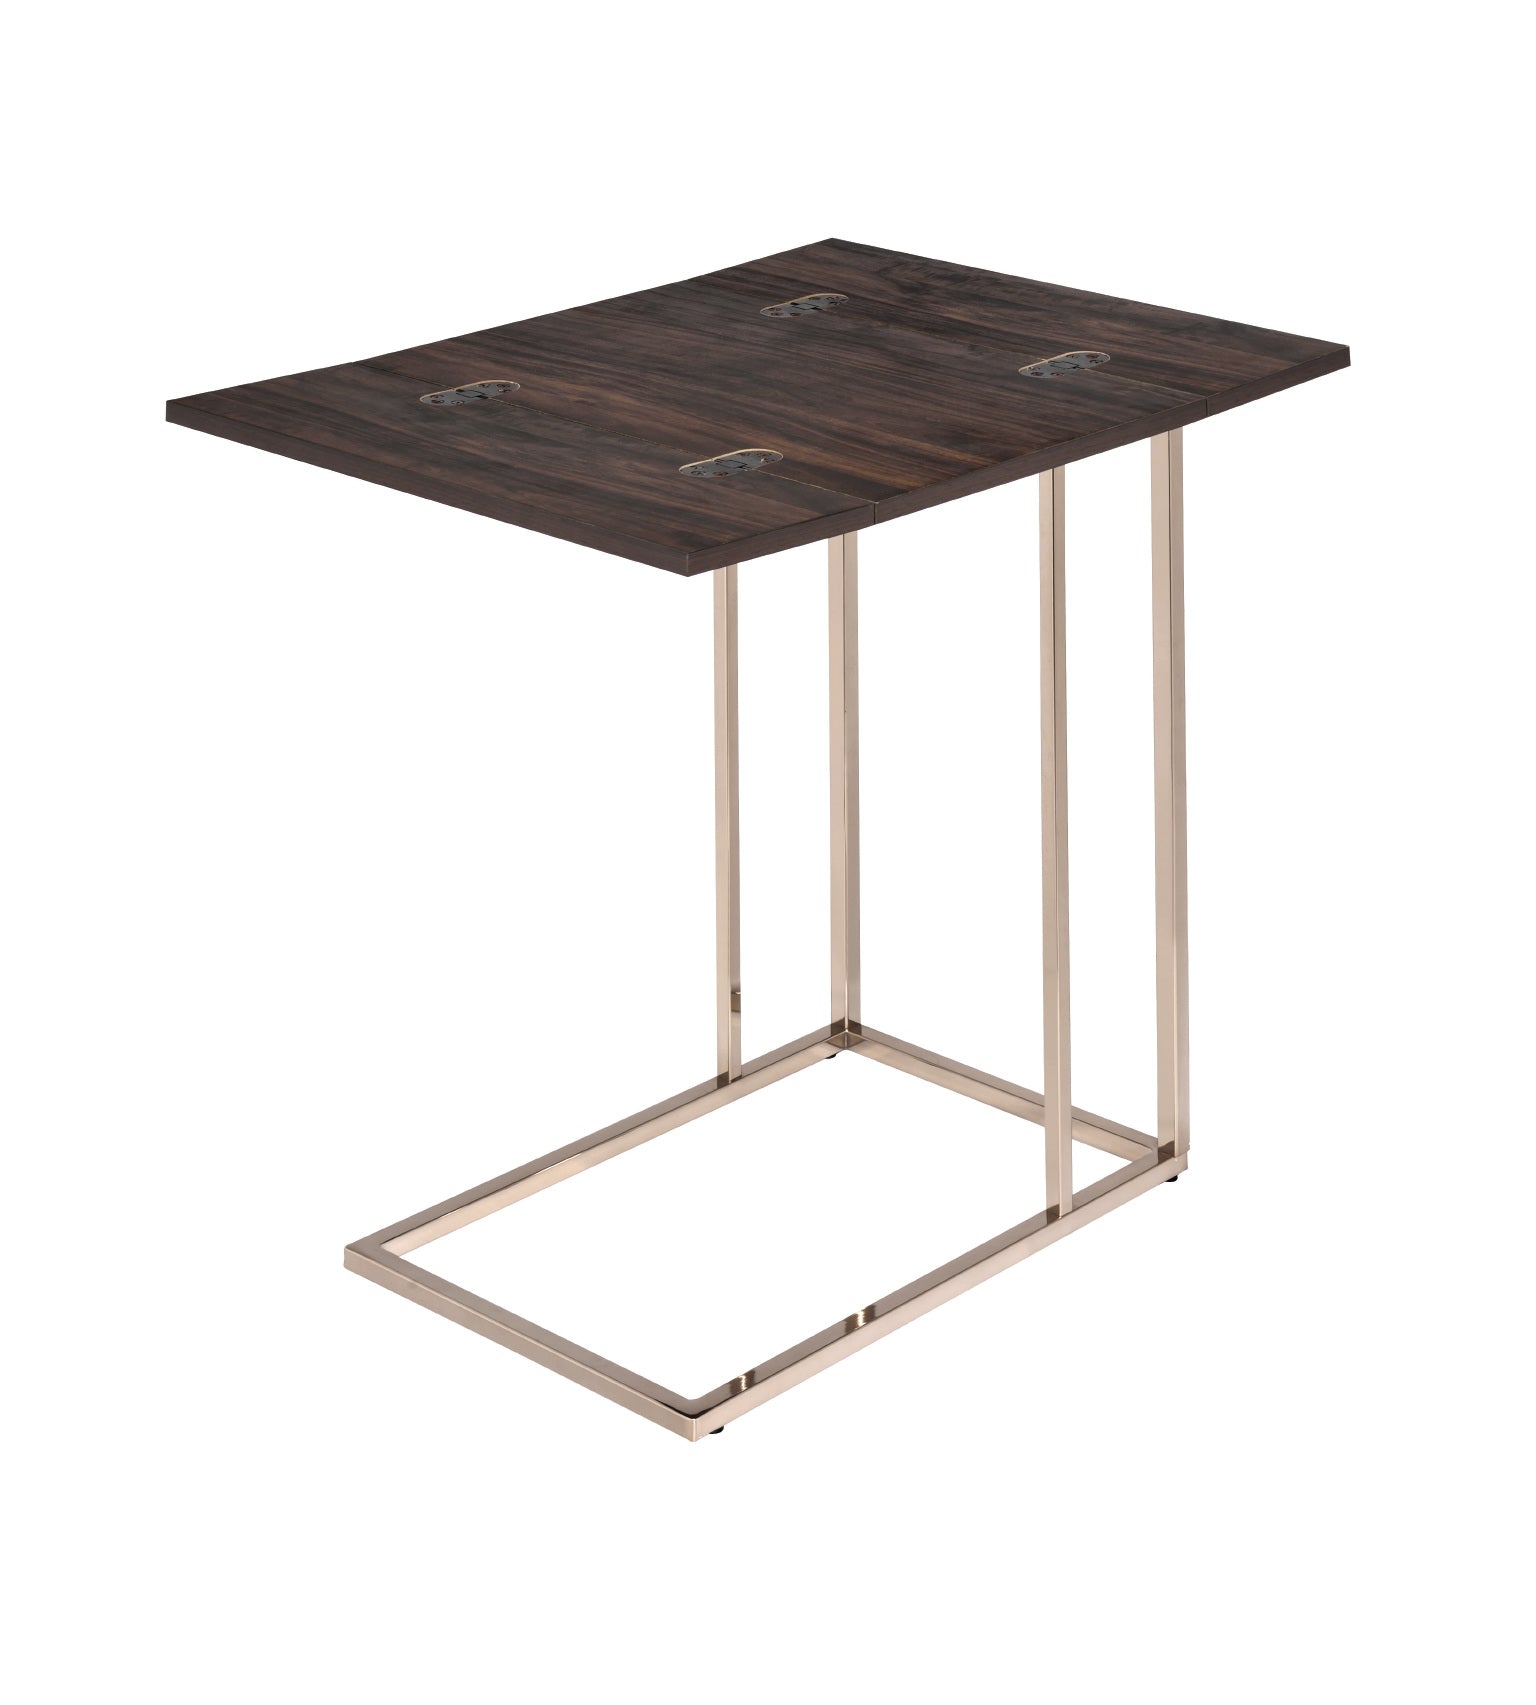 AT276 - Accent Table